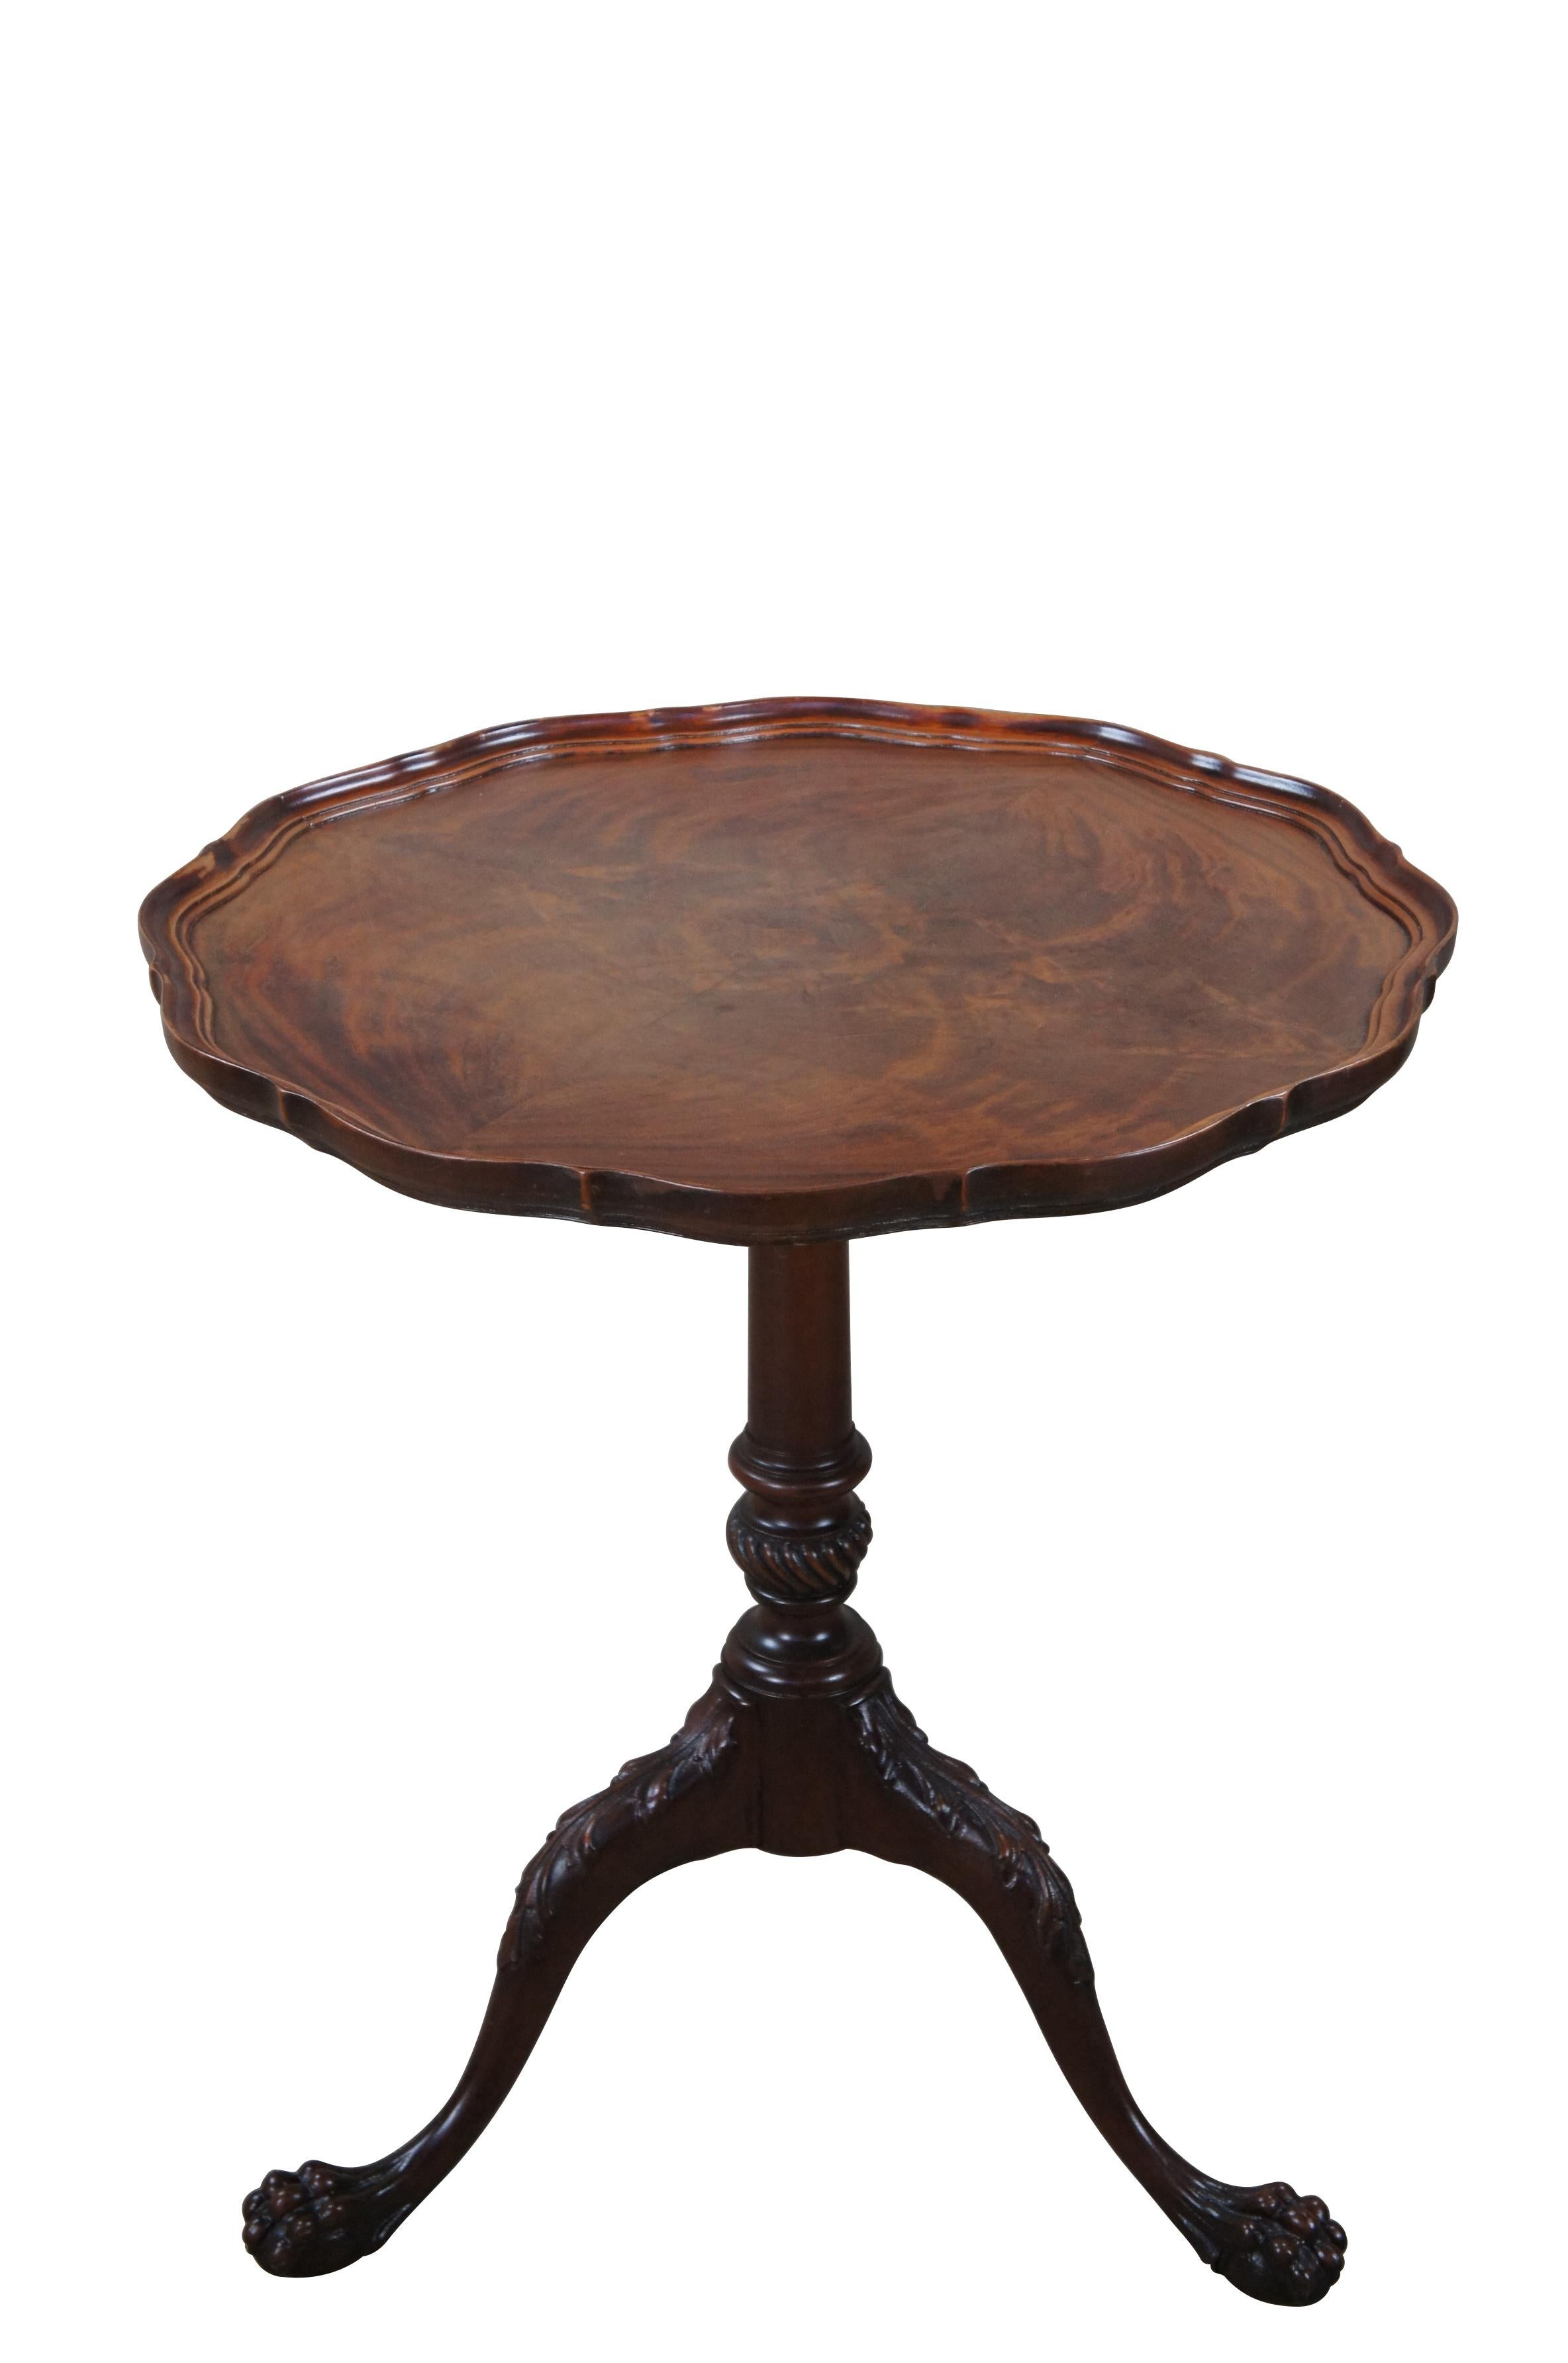 Antique turn of the century pie crust tea table.  Made of mahogany featuring scalloped gallery top supported by tri foot pedestal base with ornate ball claw feet and acanthus accents.

Dimensions:
26